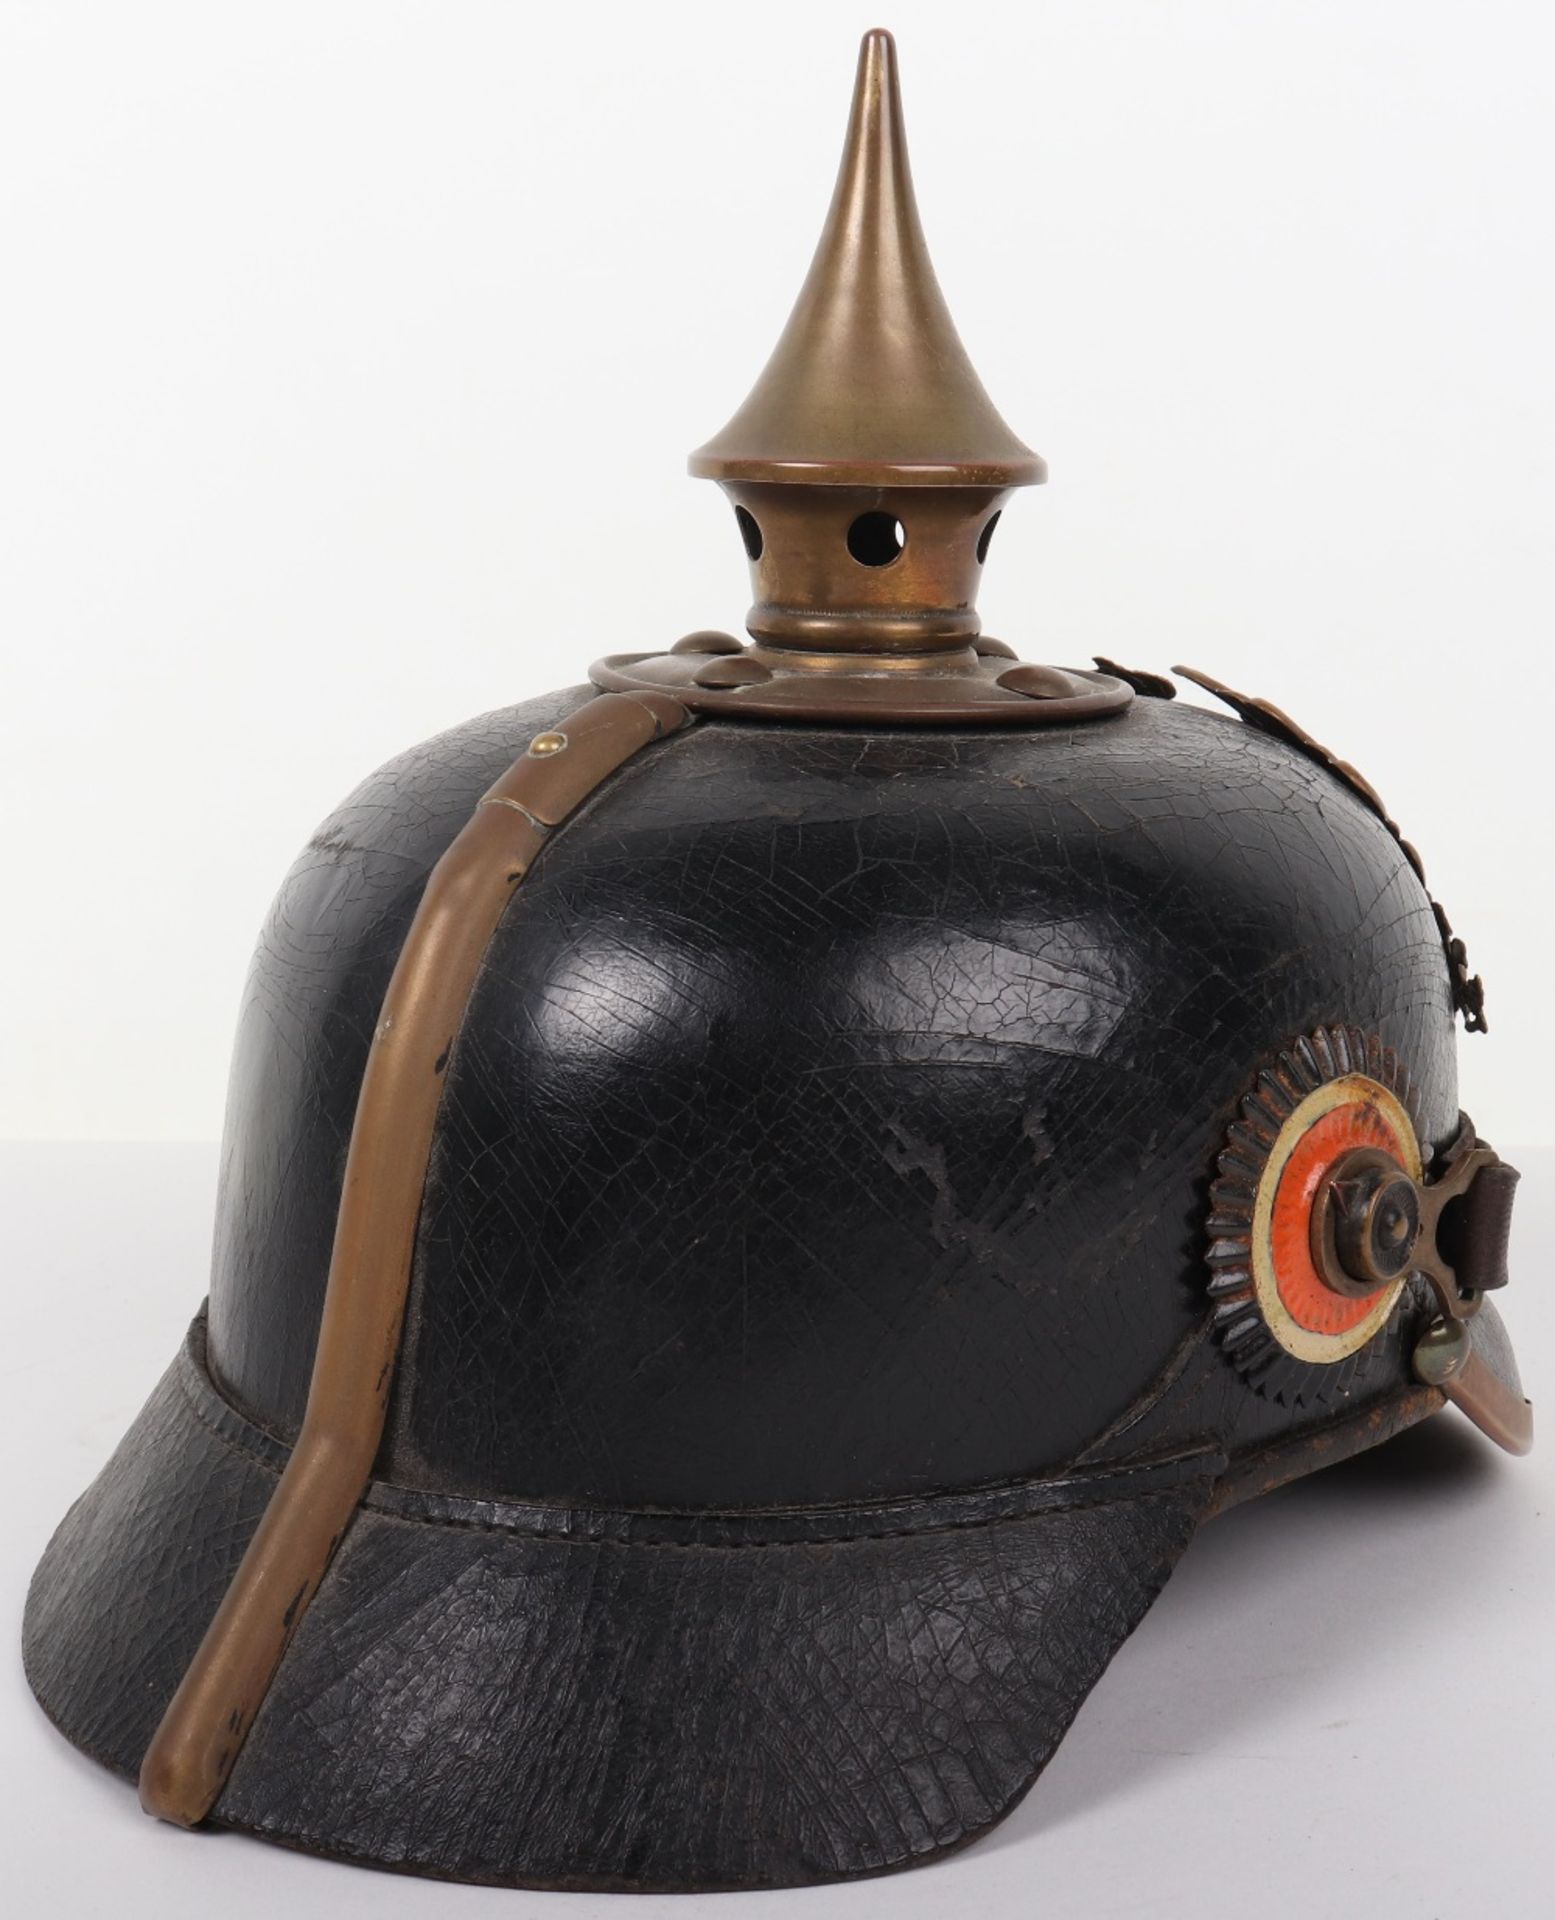 German Infantry Regiment Nr 95 (6.Thuringisches) Other Ranks Pickelhaube with Field Cover - Image 9 of 32